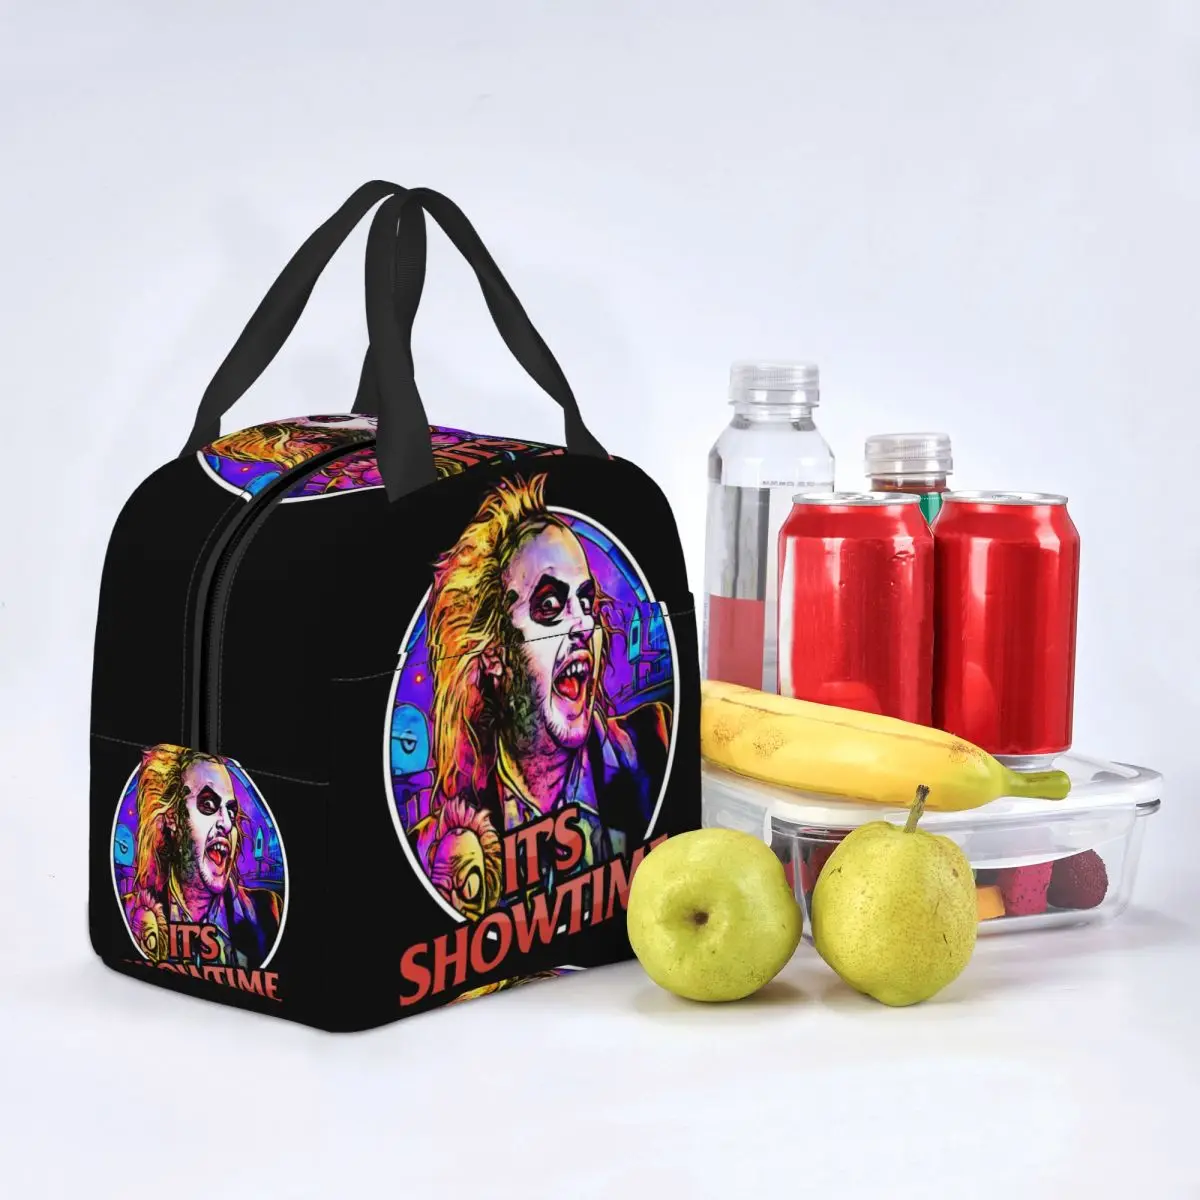 It's ShowtIme Beetlejuice Lunch Bags Waterproof Insulated Cooler Tim Burton Horror Thermal Cold Food Picnic Tote for Women Kids